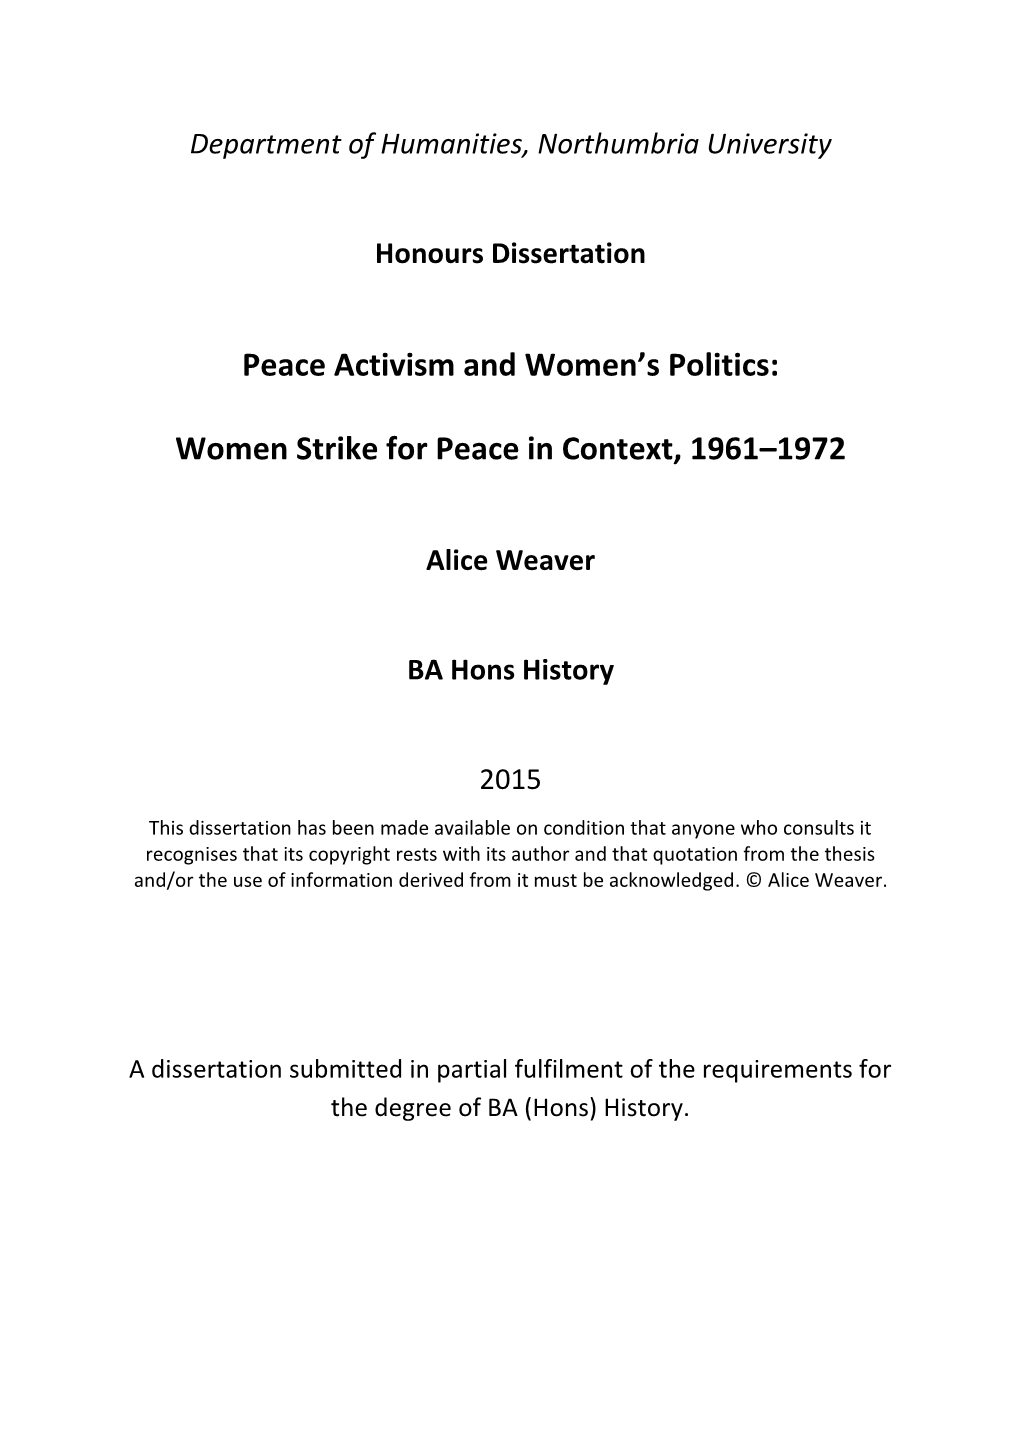 Women Strike for Peace in Context, 1961–1972